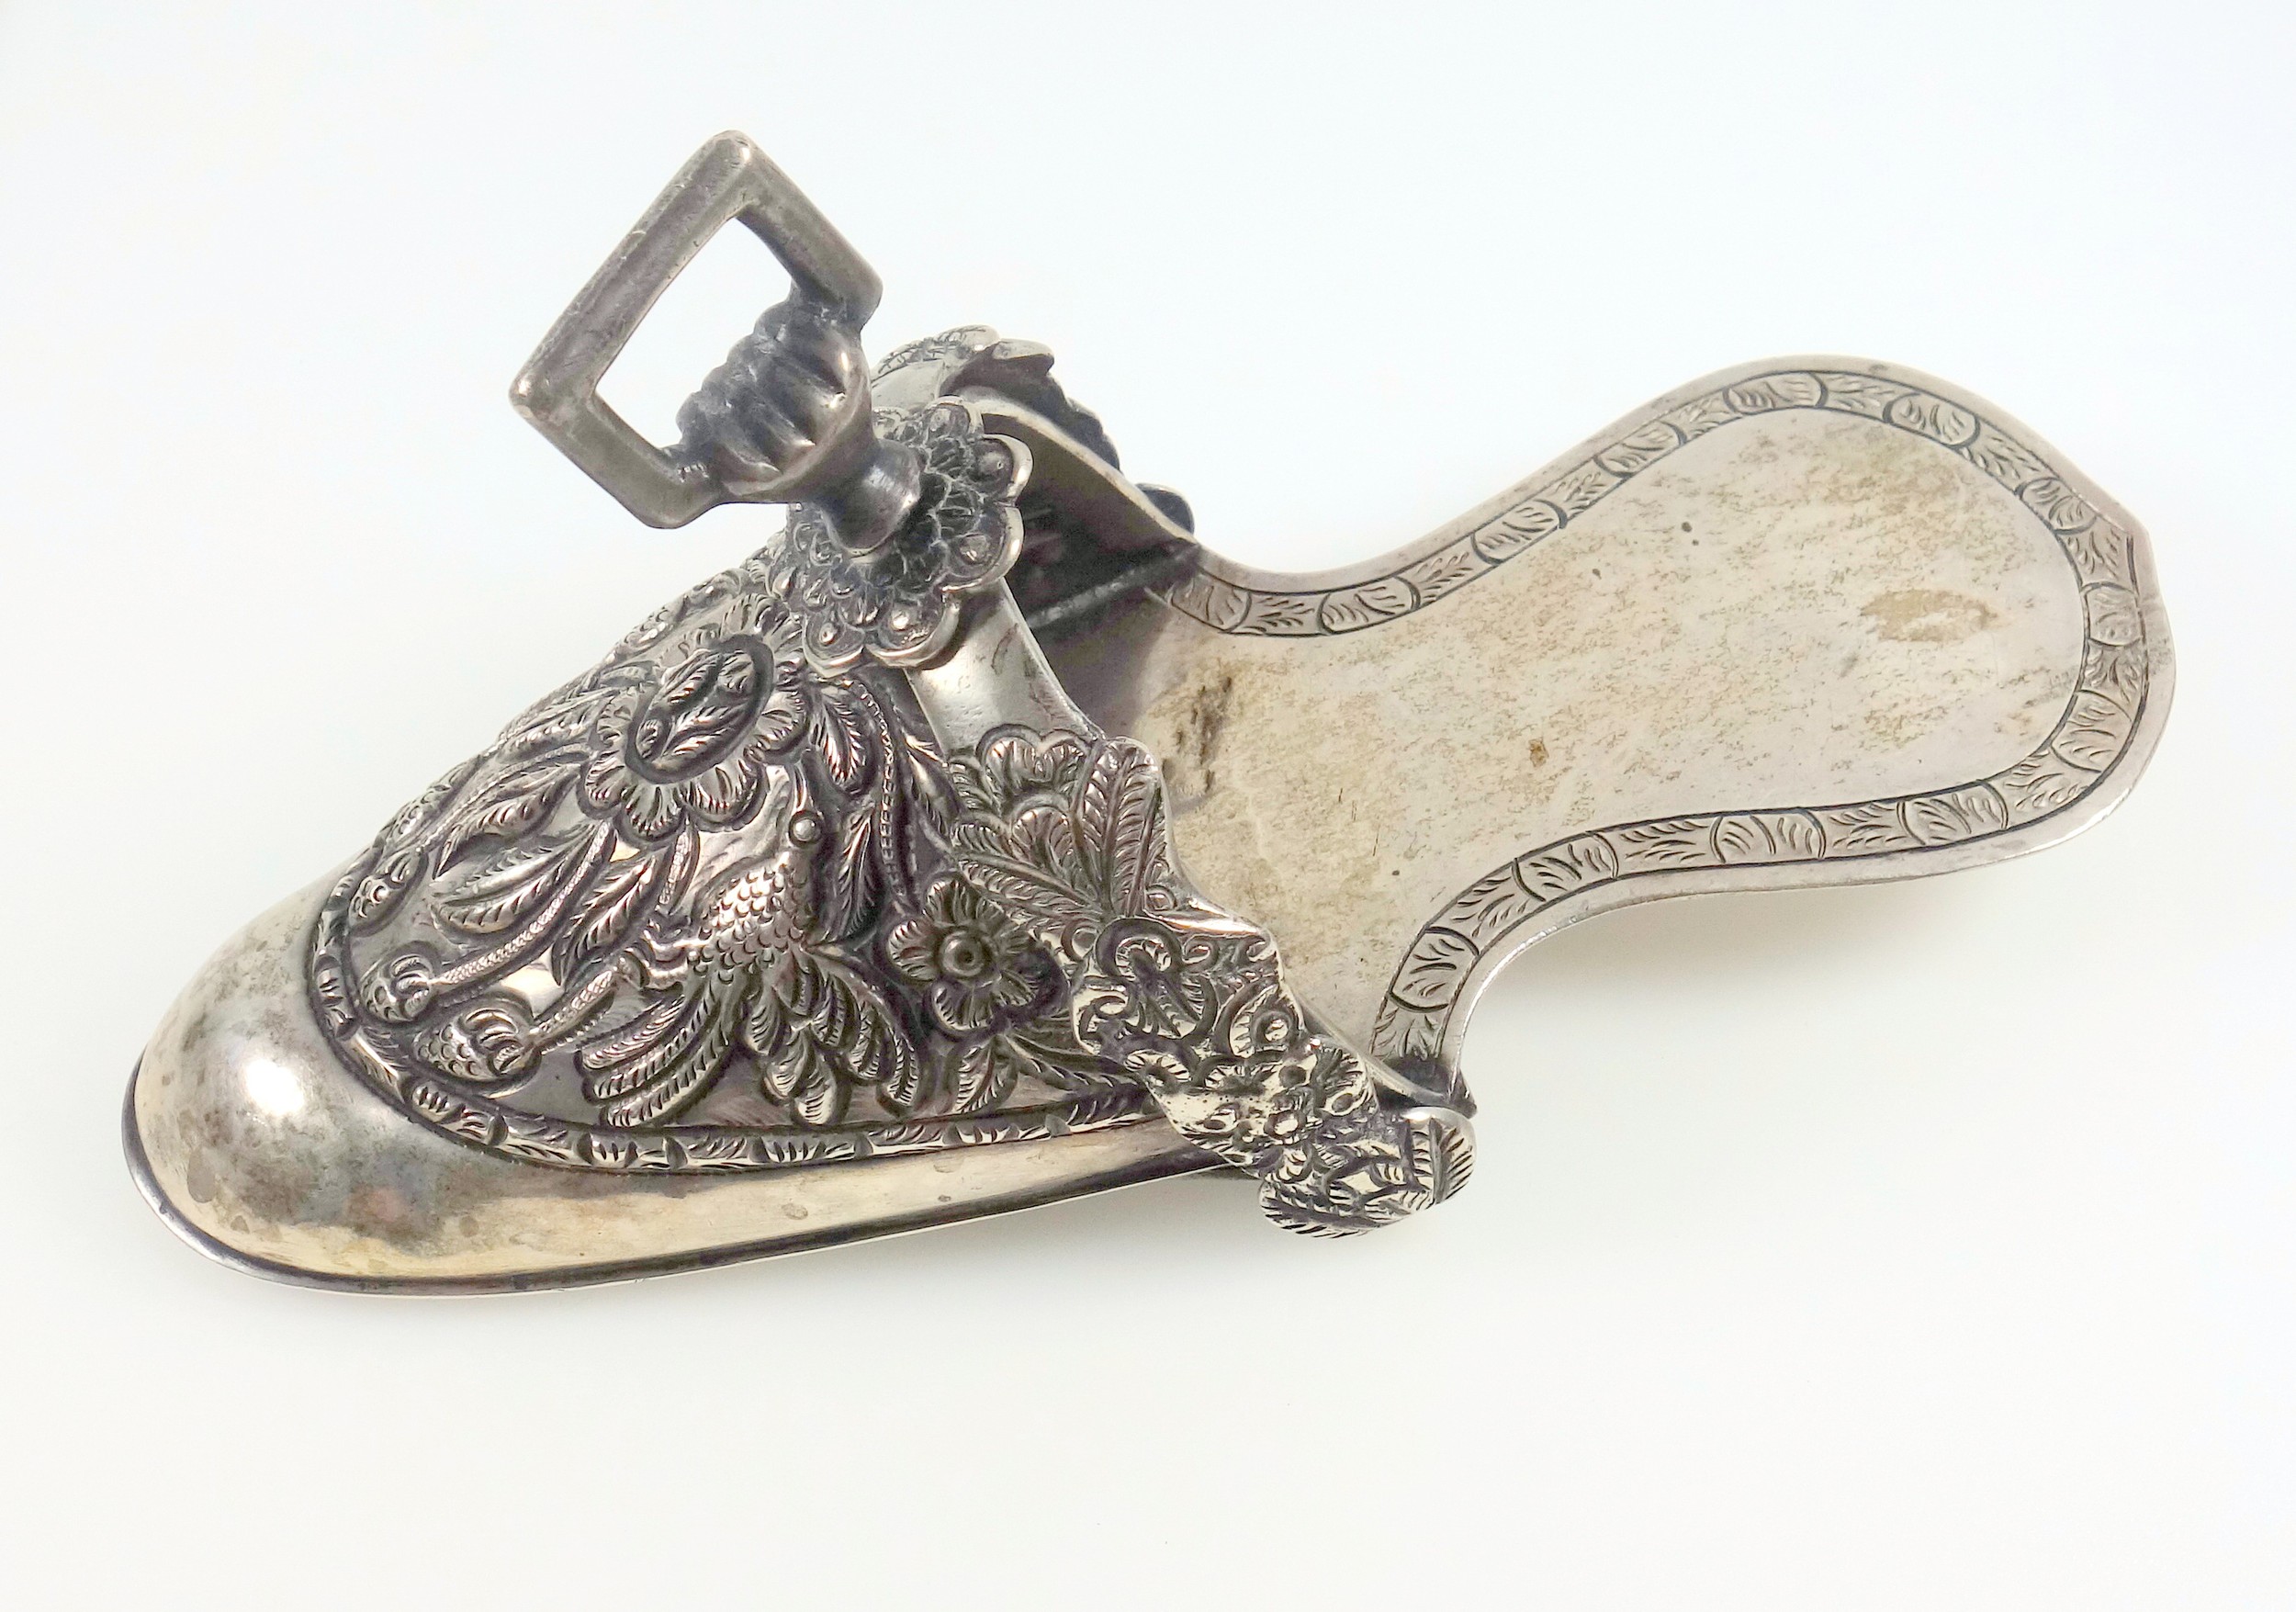 South American ladies white metal stirrup in the form of a shoe, embossed with 2 exotic birds, fruit